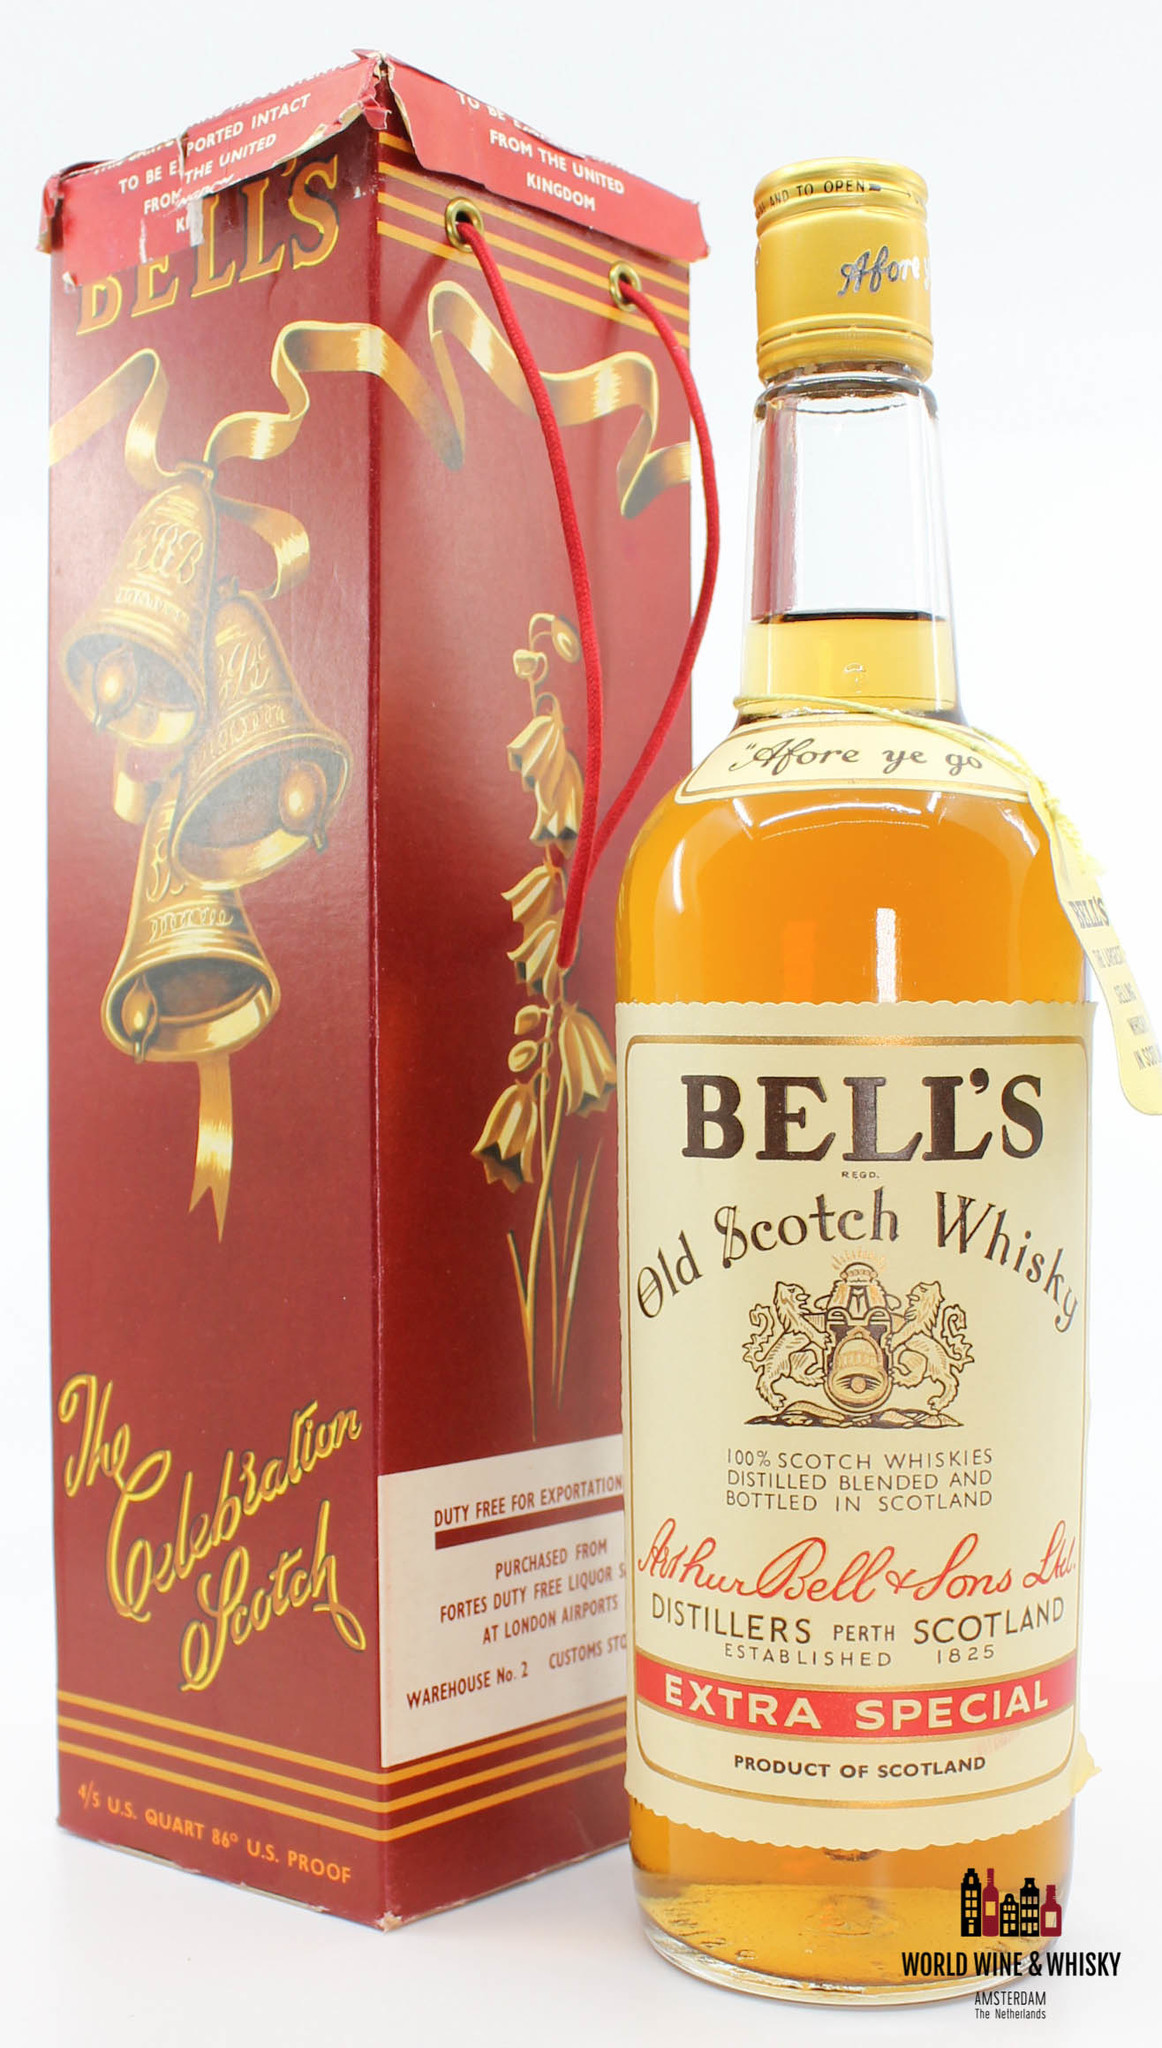 Bell's Old Scotch Whisky - Extra Special - After ye go - Duty Free